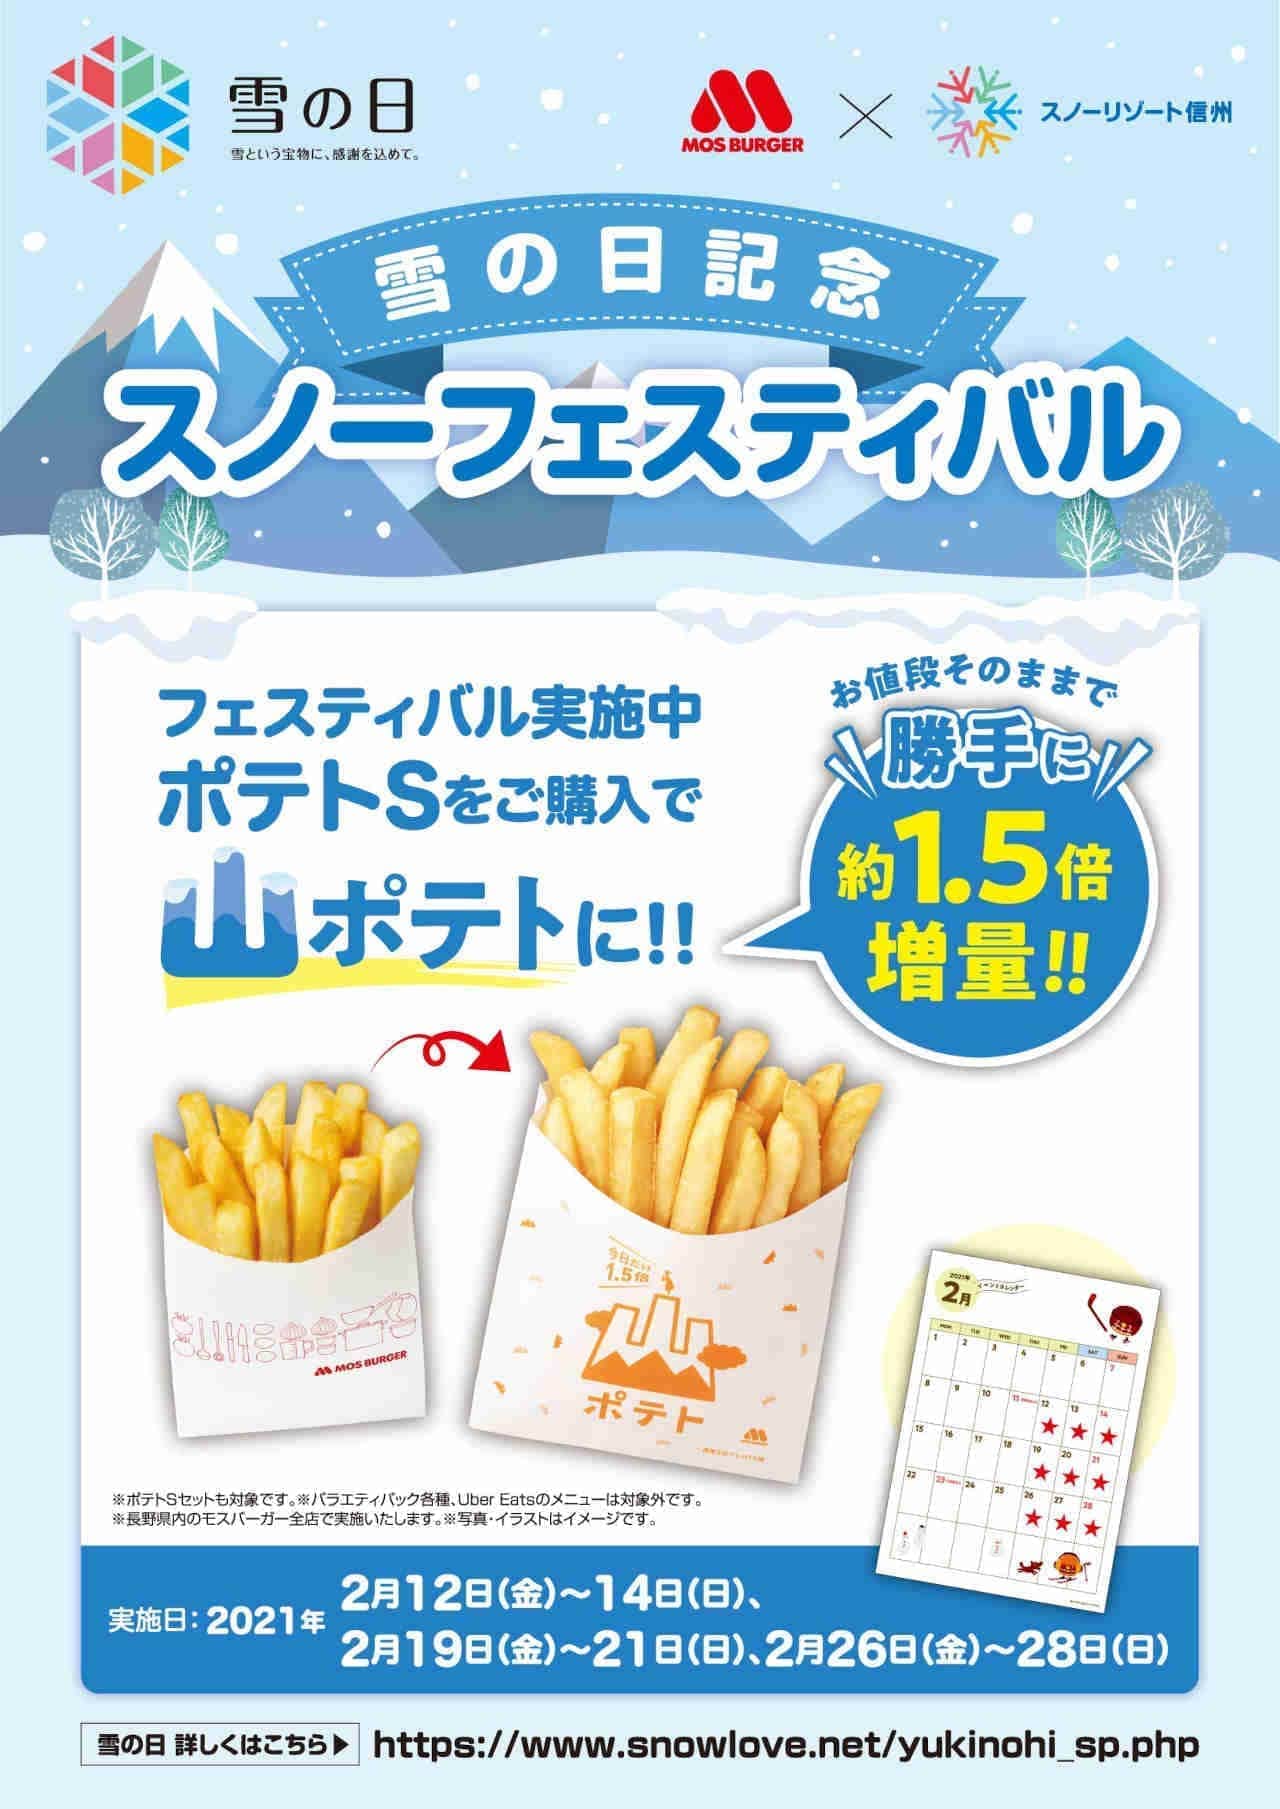 Mos Burger "Mountain Potato" Limited to the area! Appeared in time for "Snowy Day"